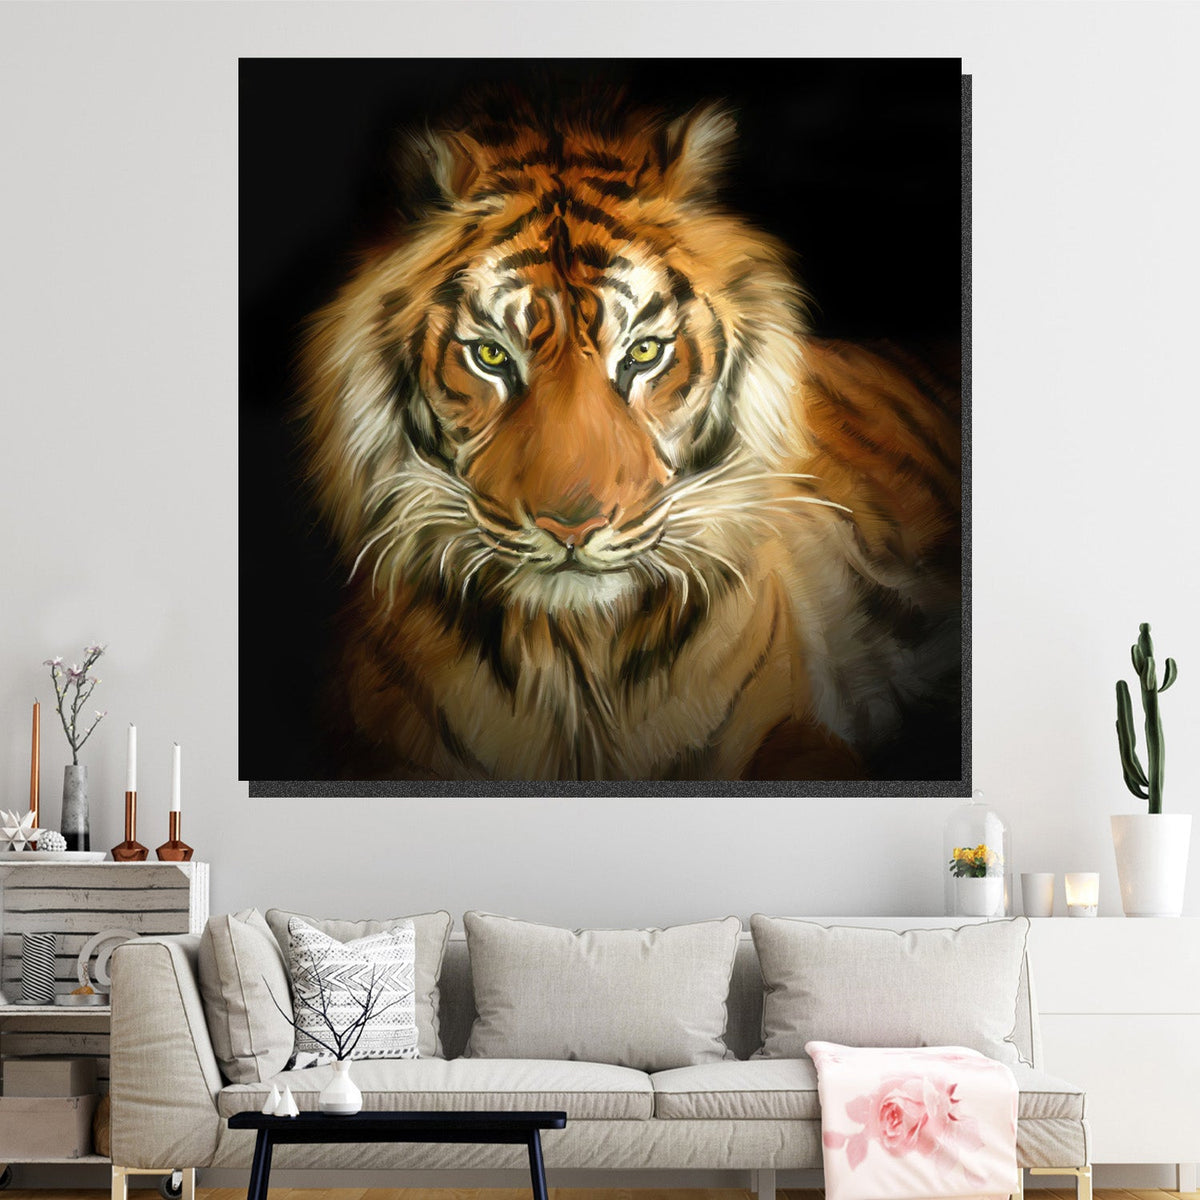 https://cdn.shopify.com/s/files/1/0387/9986/8044/products/PaintedTigerCanvasArtprintStretched-1.jpg